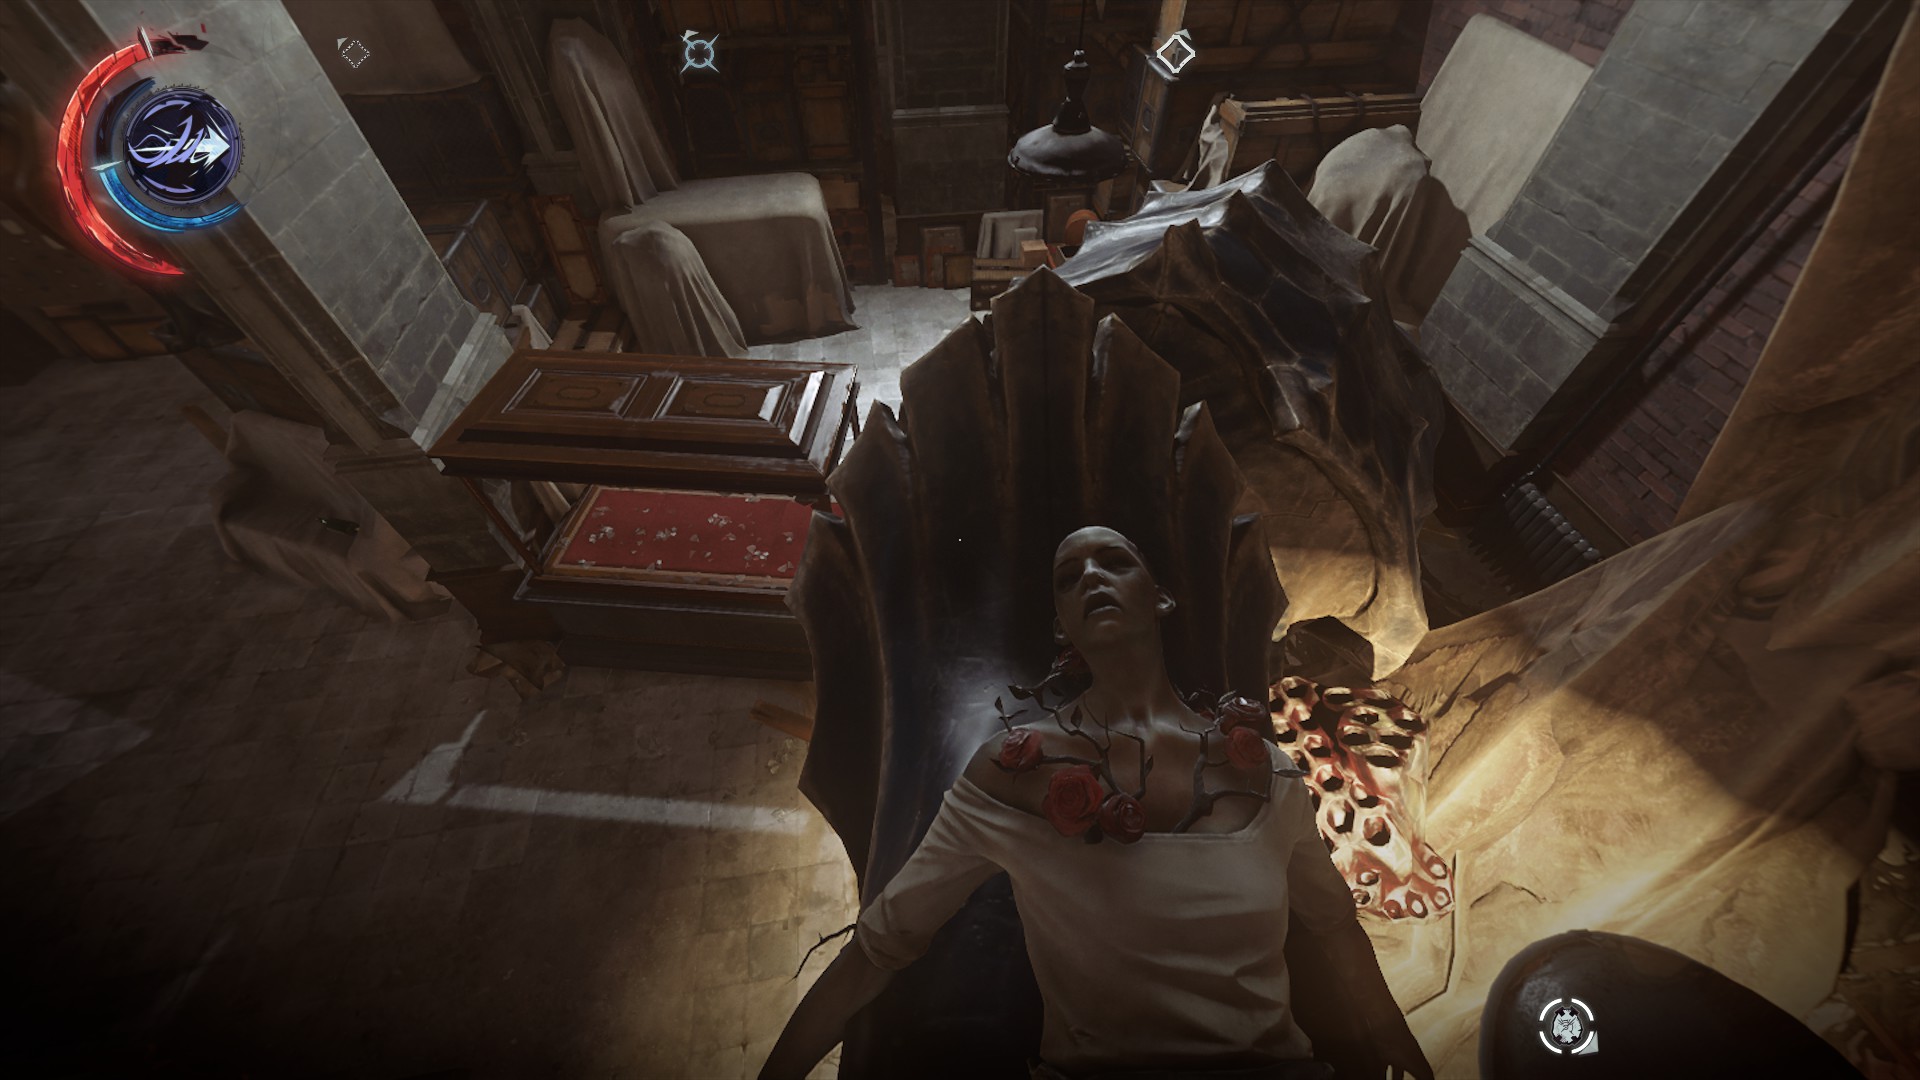 Unconscious Dishonored 2 Enemies Who Look Like They Just Had A Sick Party